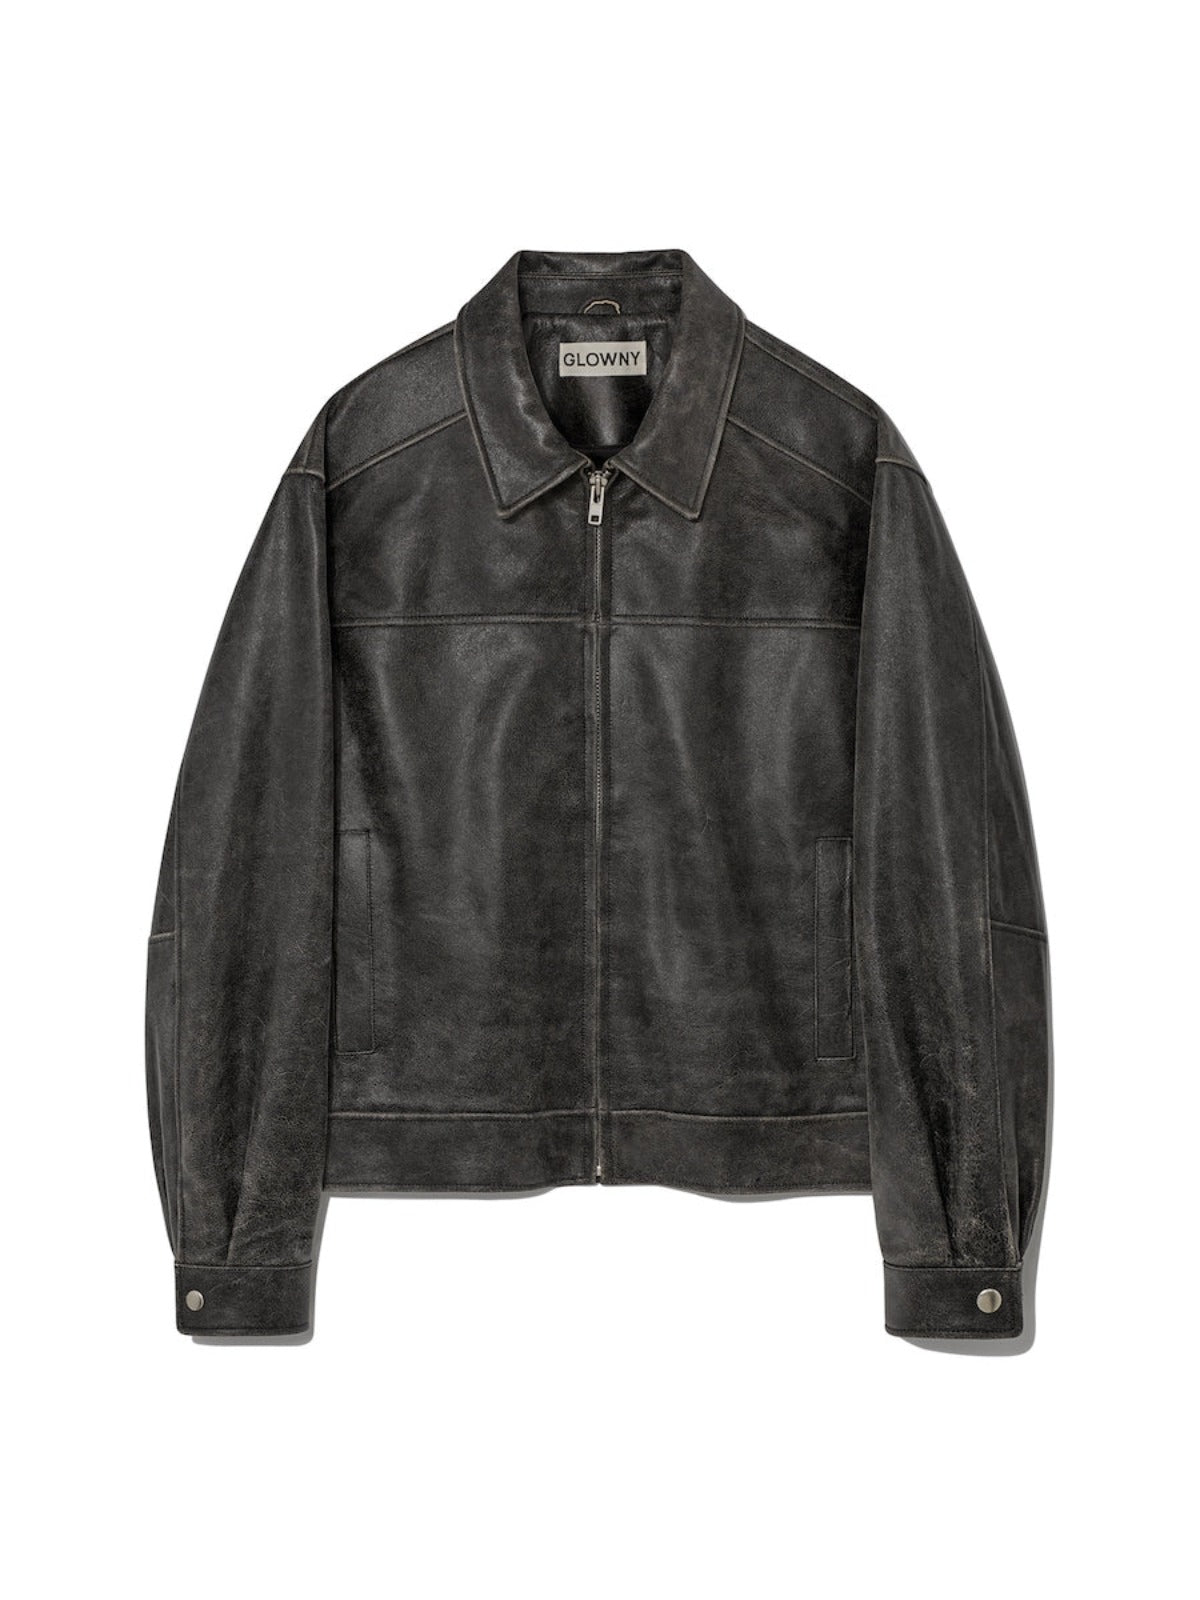 Fade Leather Jacket - Boxy In Black